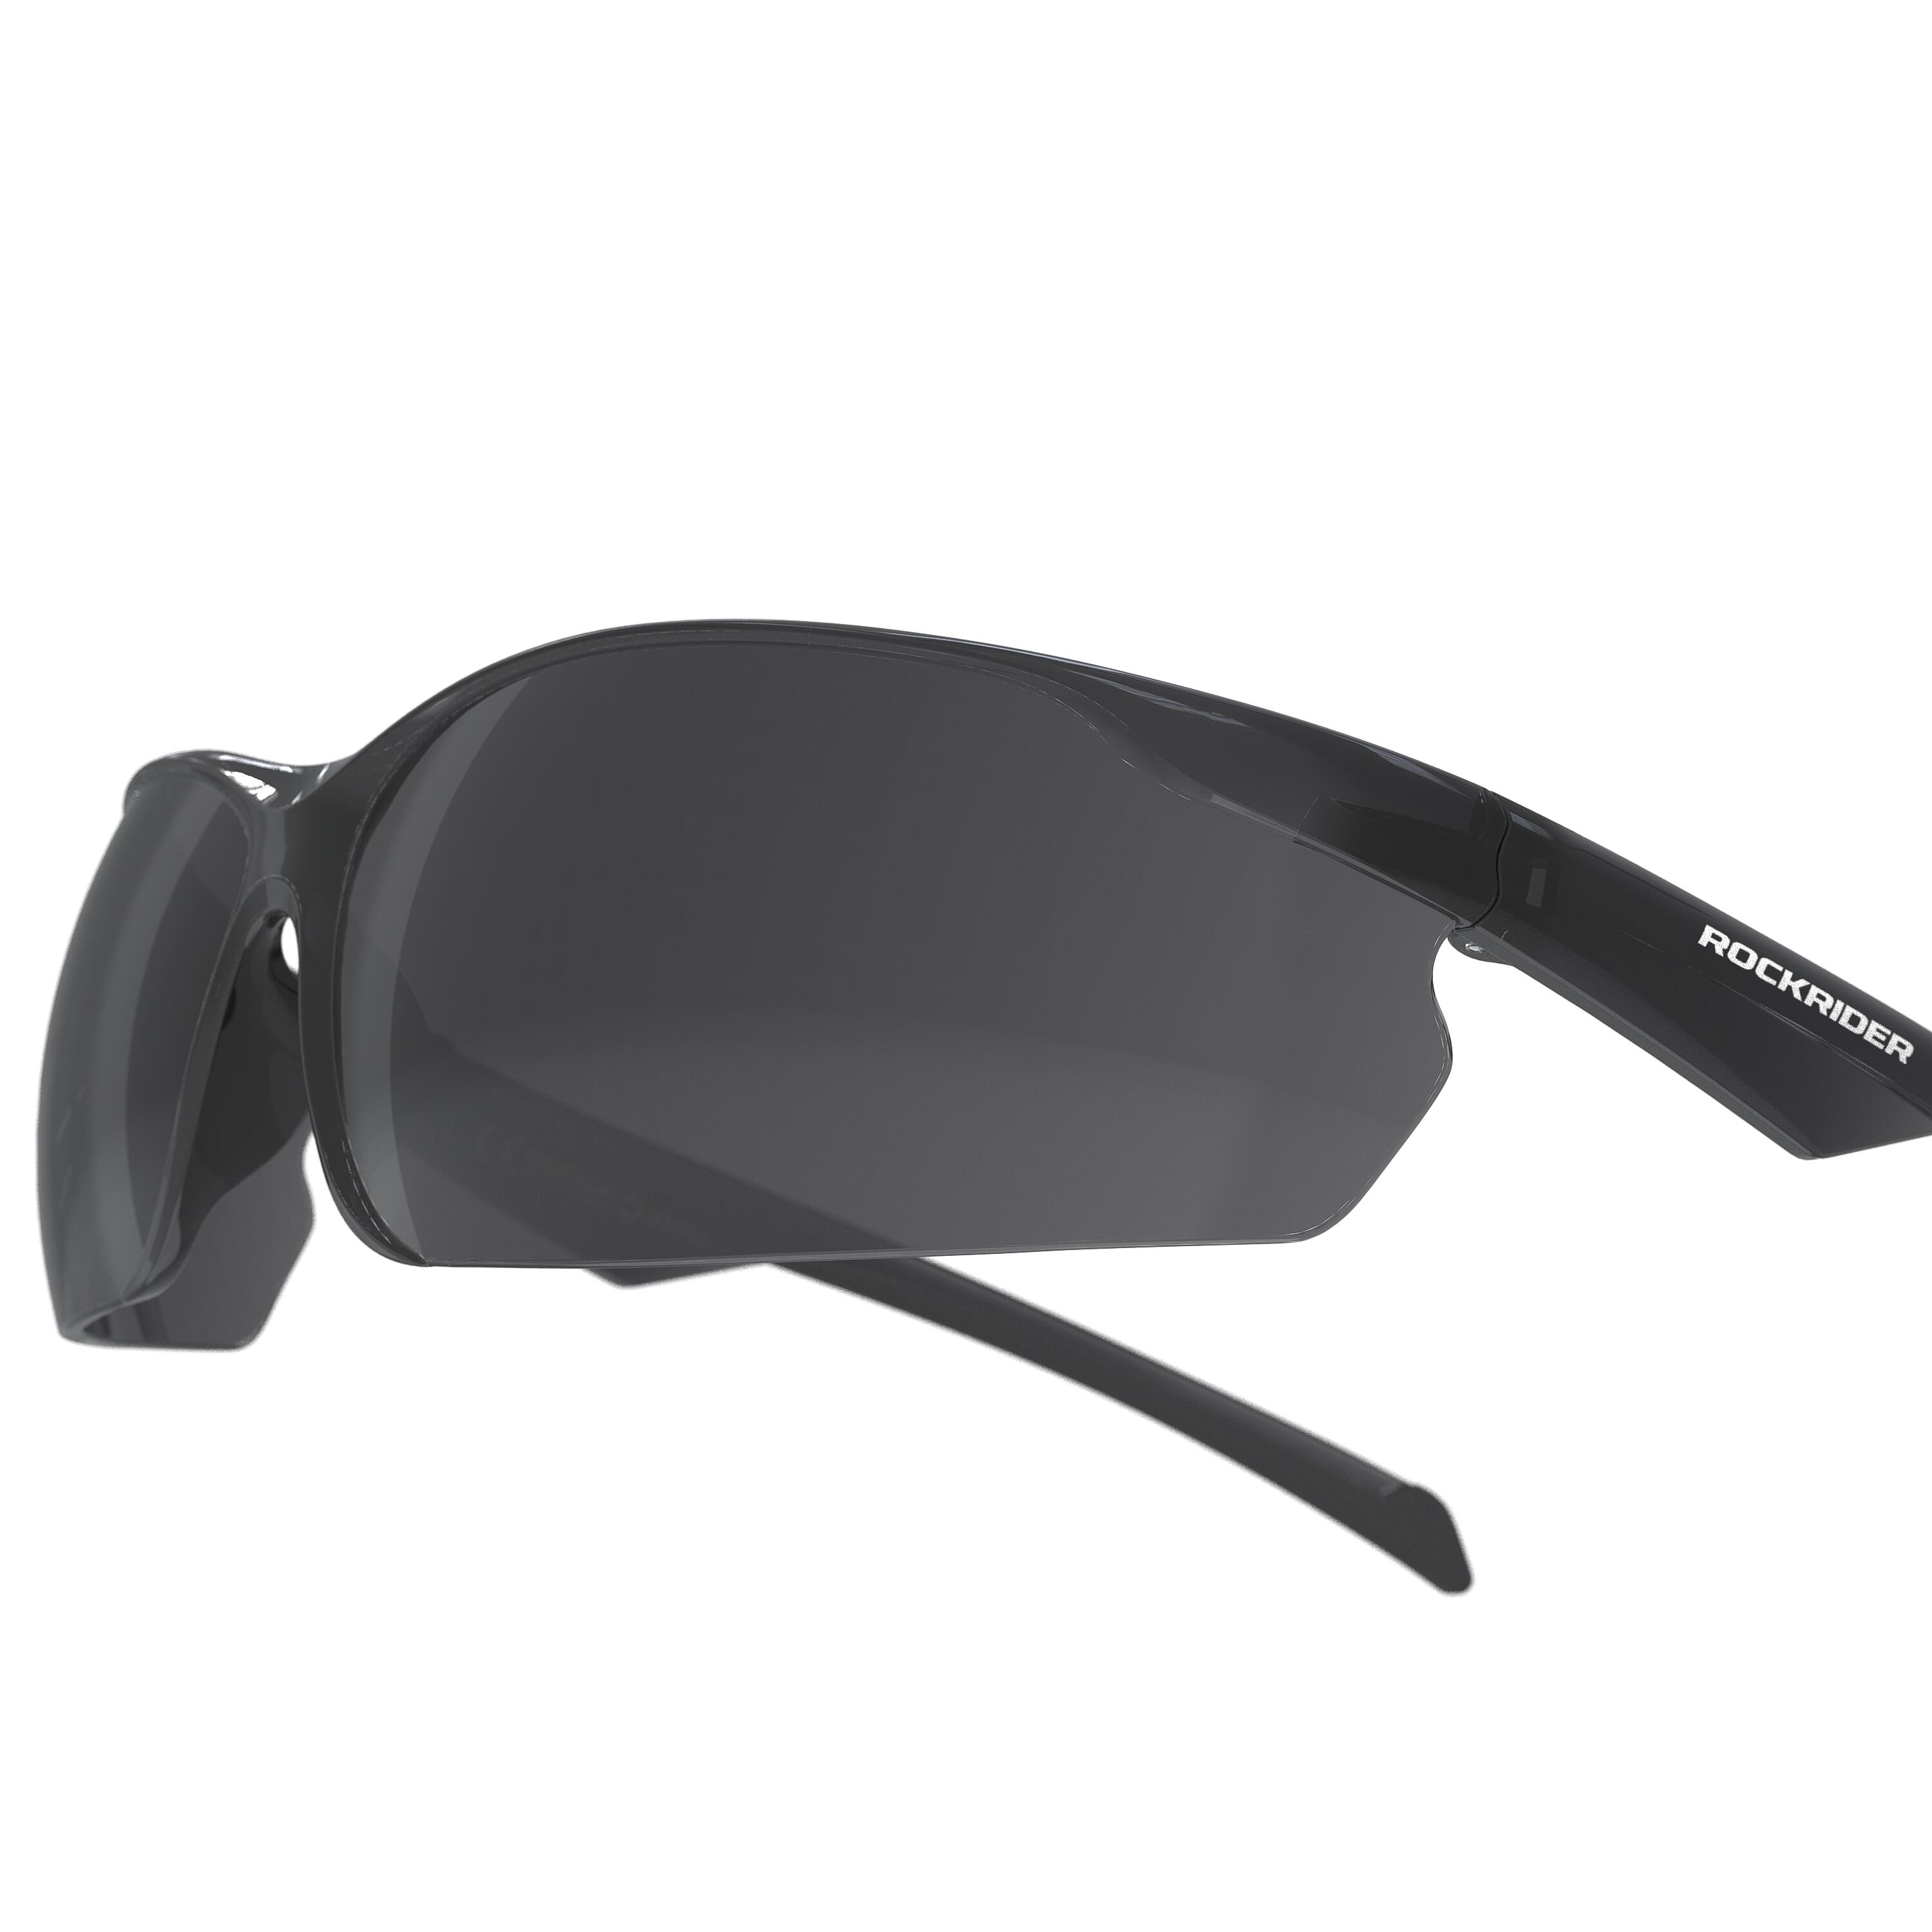 Buy Cycling Sunglasses Online at Best Prices - Cambio Bikes